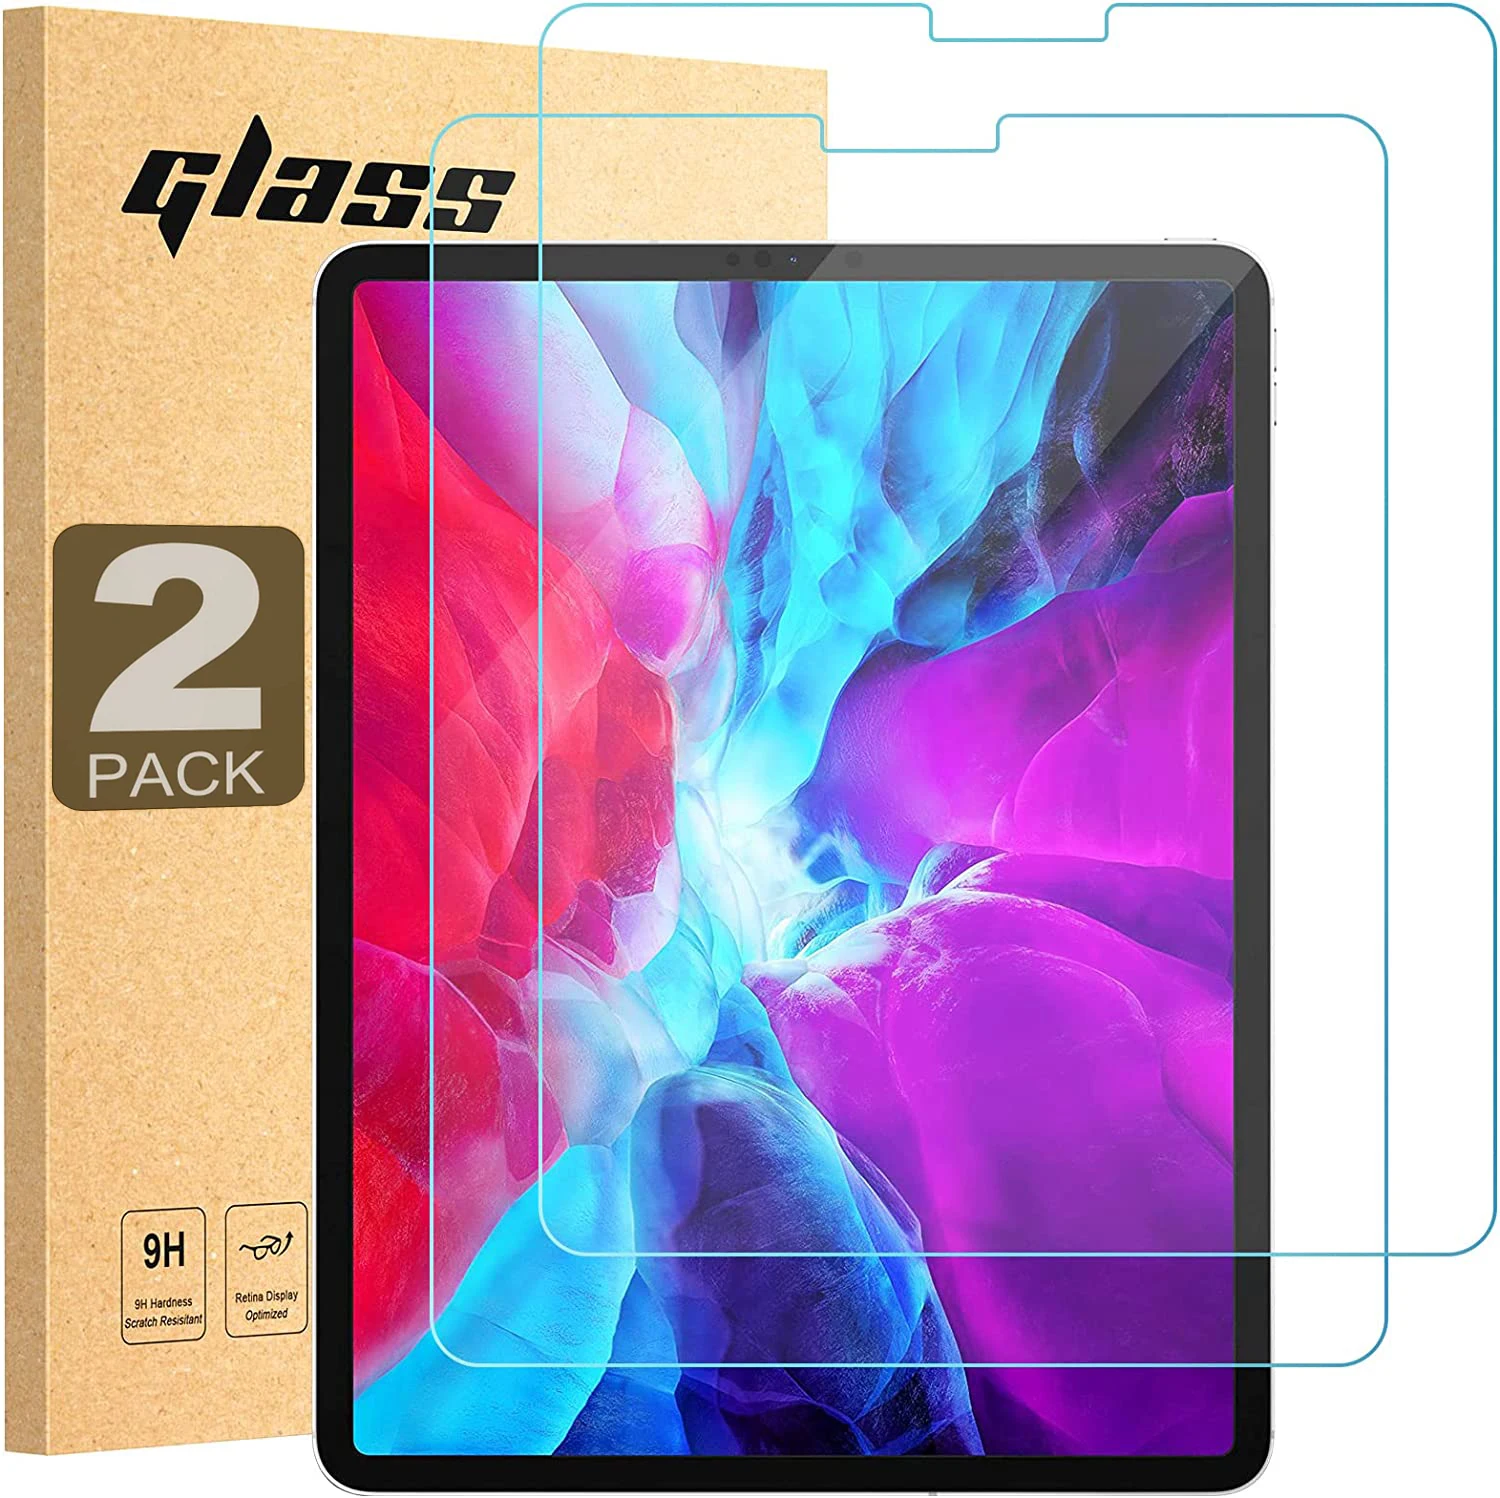 2pcs Screen Protector Tempered Glass For iPad Pro 12.9 2020 2018 2015 2017 2021 2022 A2232 A2437 A1670 Full Coverage Tablet Film 2pcs tablet tempered glass screen protector cover for ipad 9th generation 10 2 inch 2021 full coverage protective film ipad 9